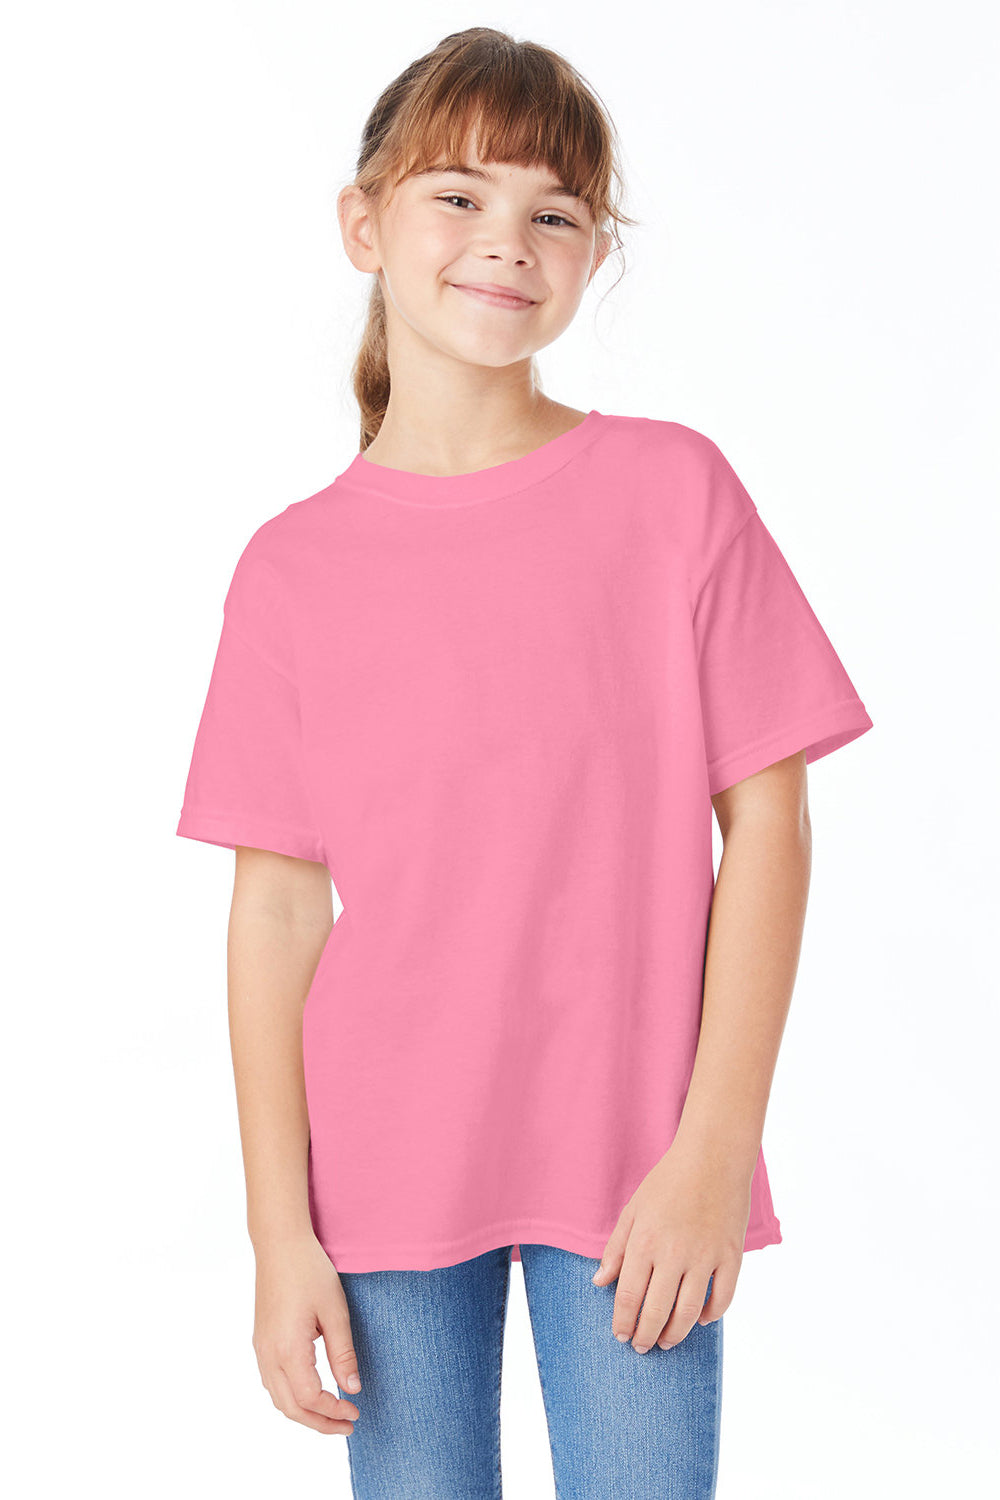 Hanes 5480 Youth ComfortSoft Short Sleeve Crewneck T-Shirt Safety Pink Front